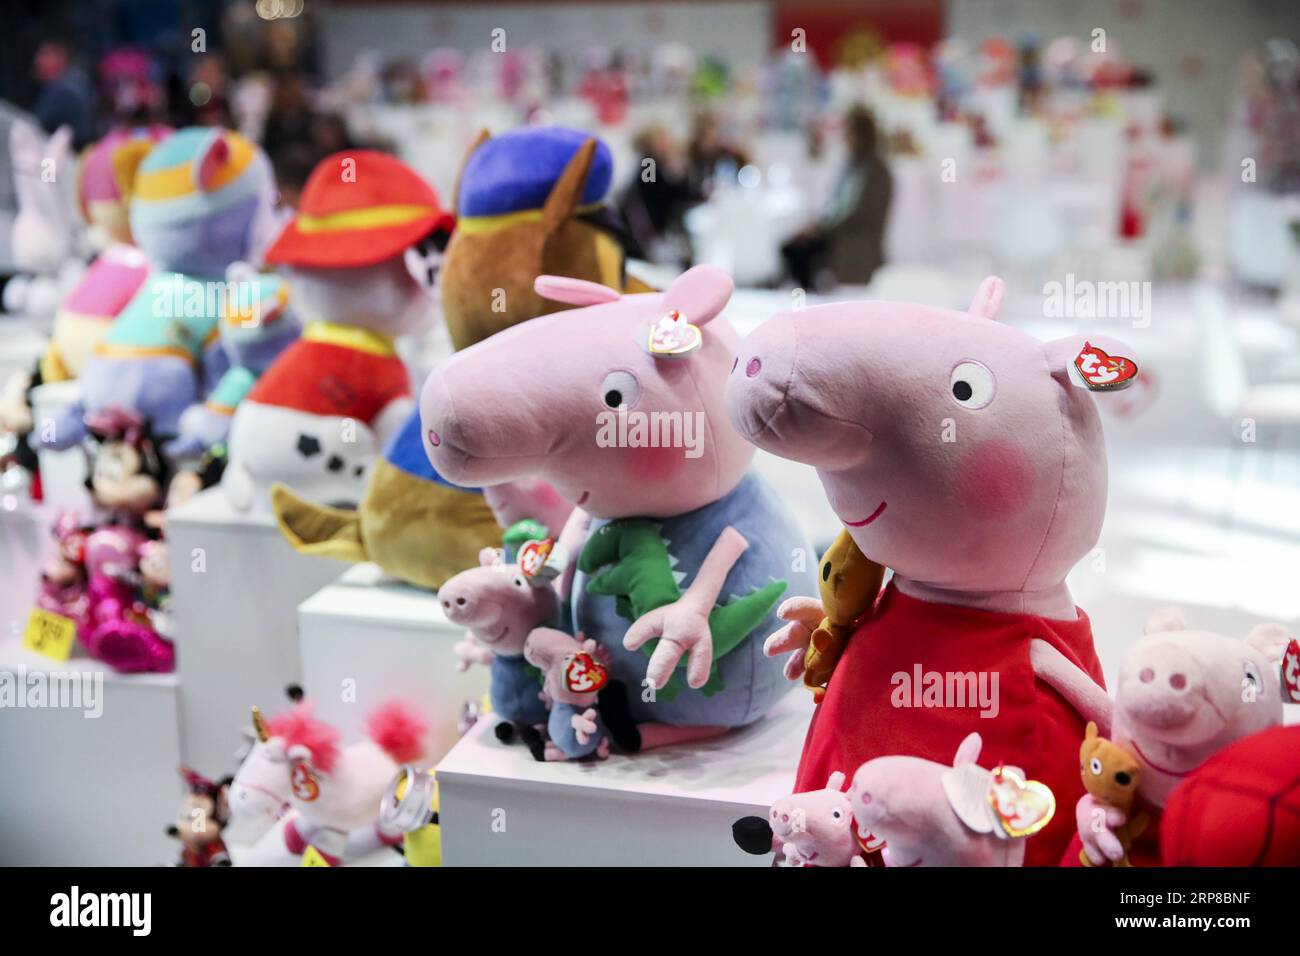 (190226) -- BEIJING, Feb. 26, 2019 -- Stuffed toys are seen at the booth of Ty Inc. during the 116th Annual North American International Toy Fair at the Jacob K. Javits Convention Center in New York, the United States, on Feb. 19, 2019. ) Xinhua headlines: More fun toys, no painful tariffs: American toymakers hopeful on U.S.-China trade deal WangxYing PUBLICATIONxNOTxINxCHN Stock Photo